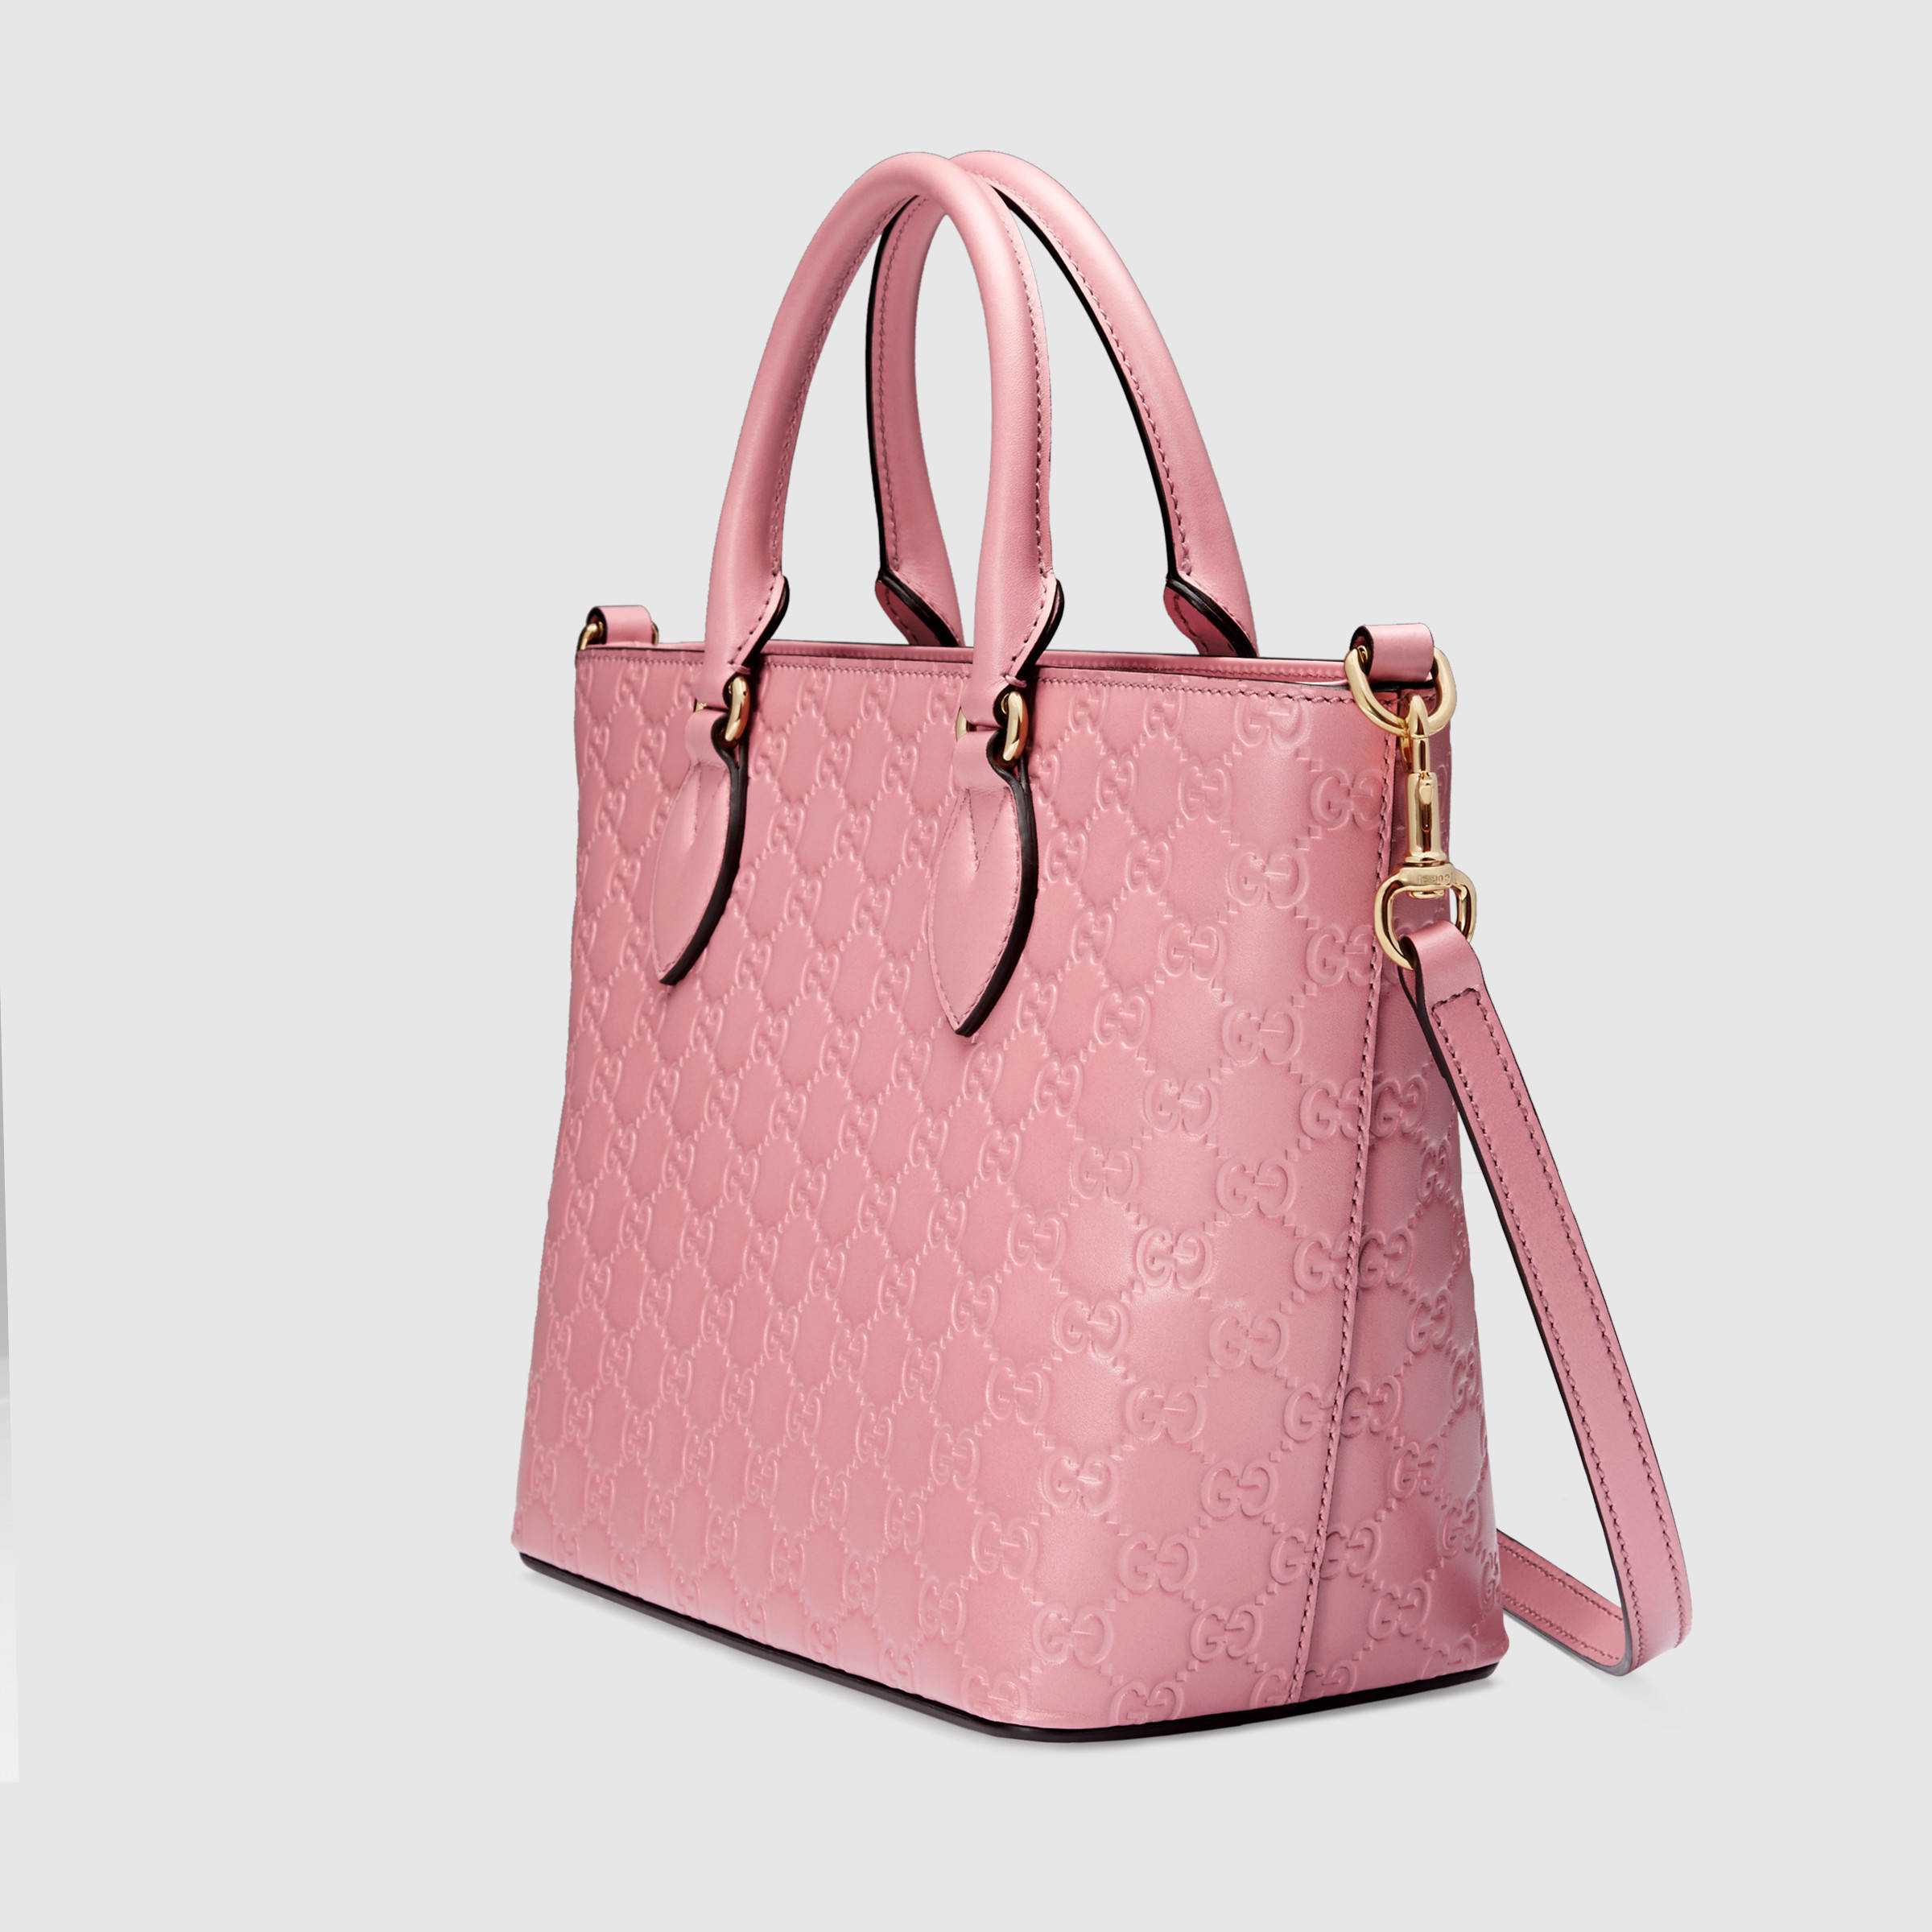 Top more than 73 gucci pink leather bag - in.cdgdbentre